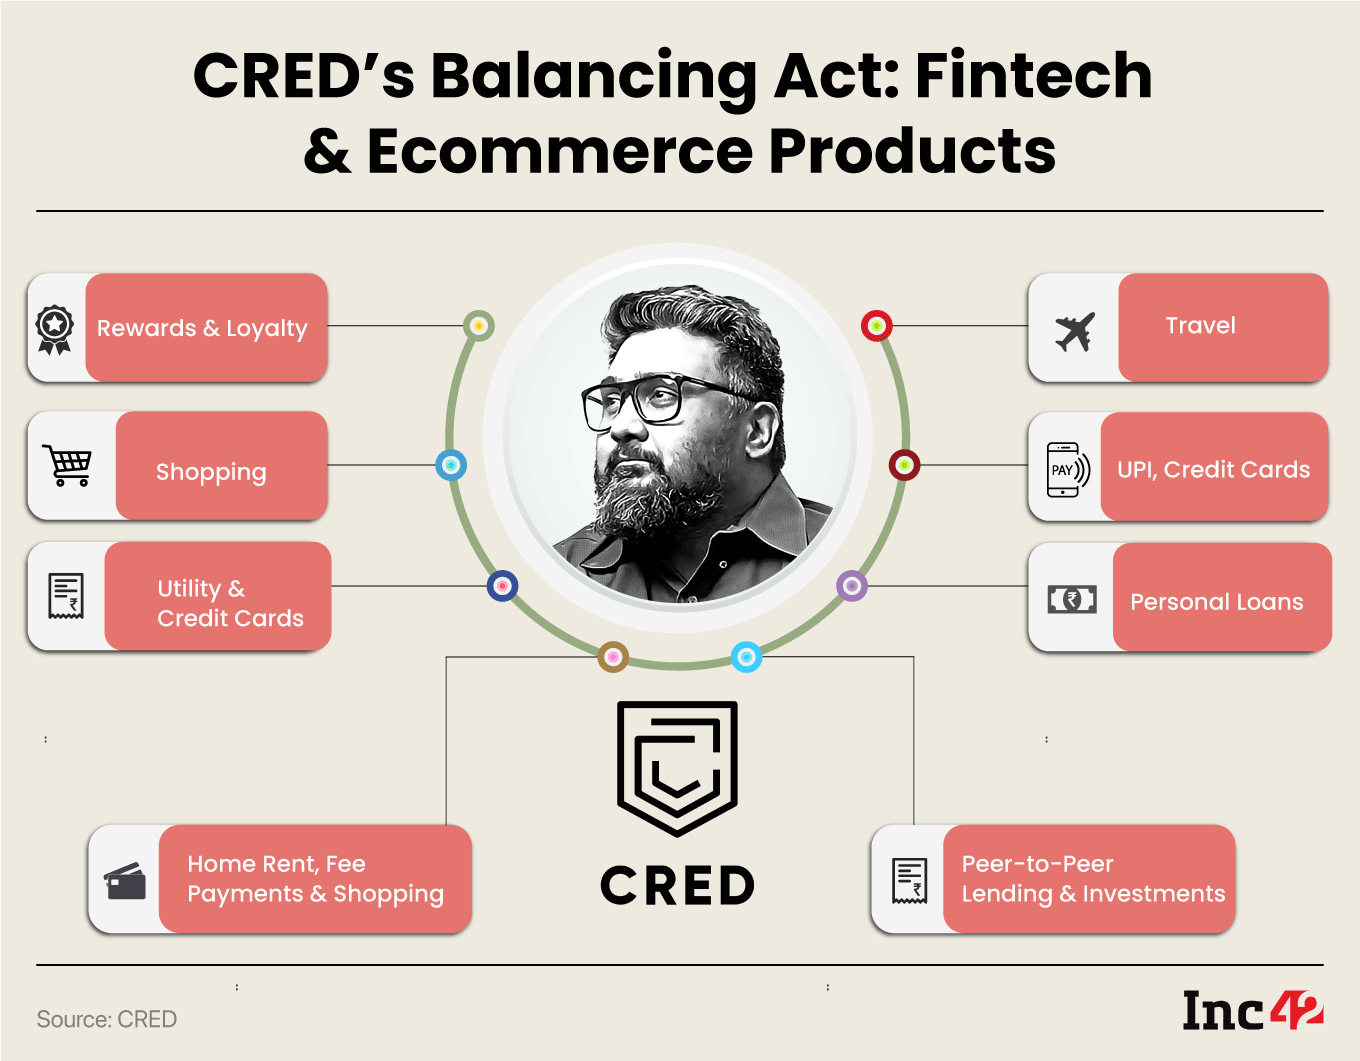 CRED's product lineup